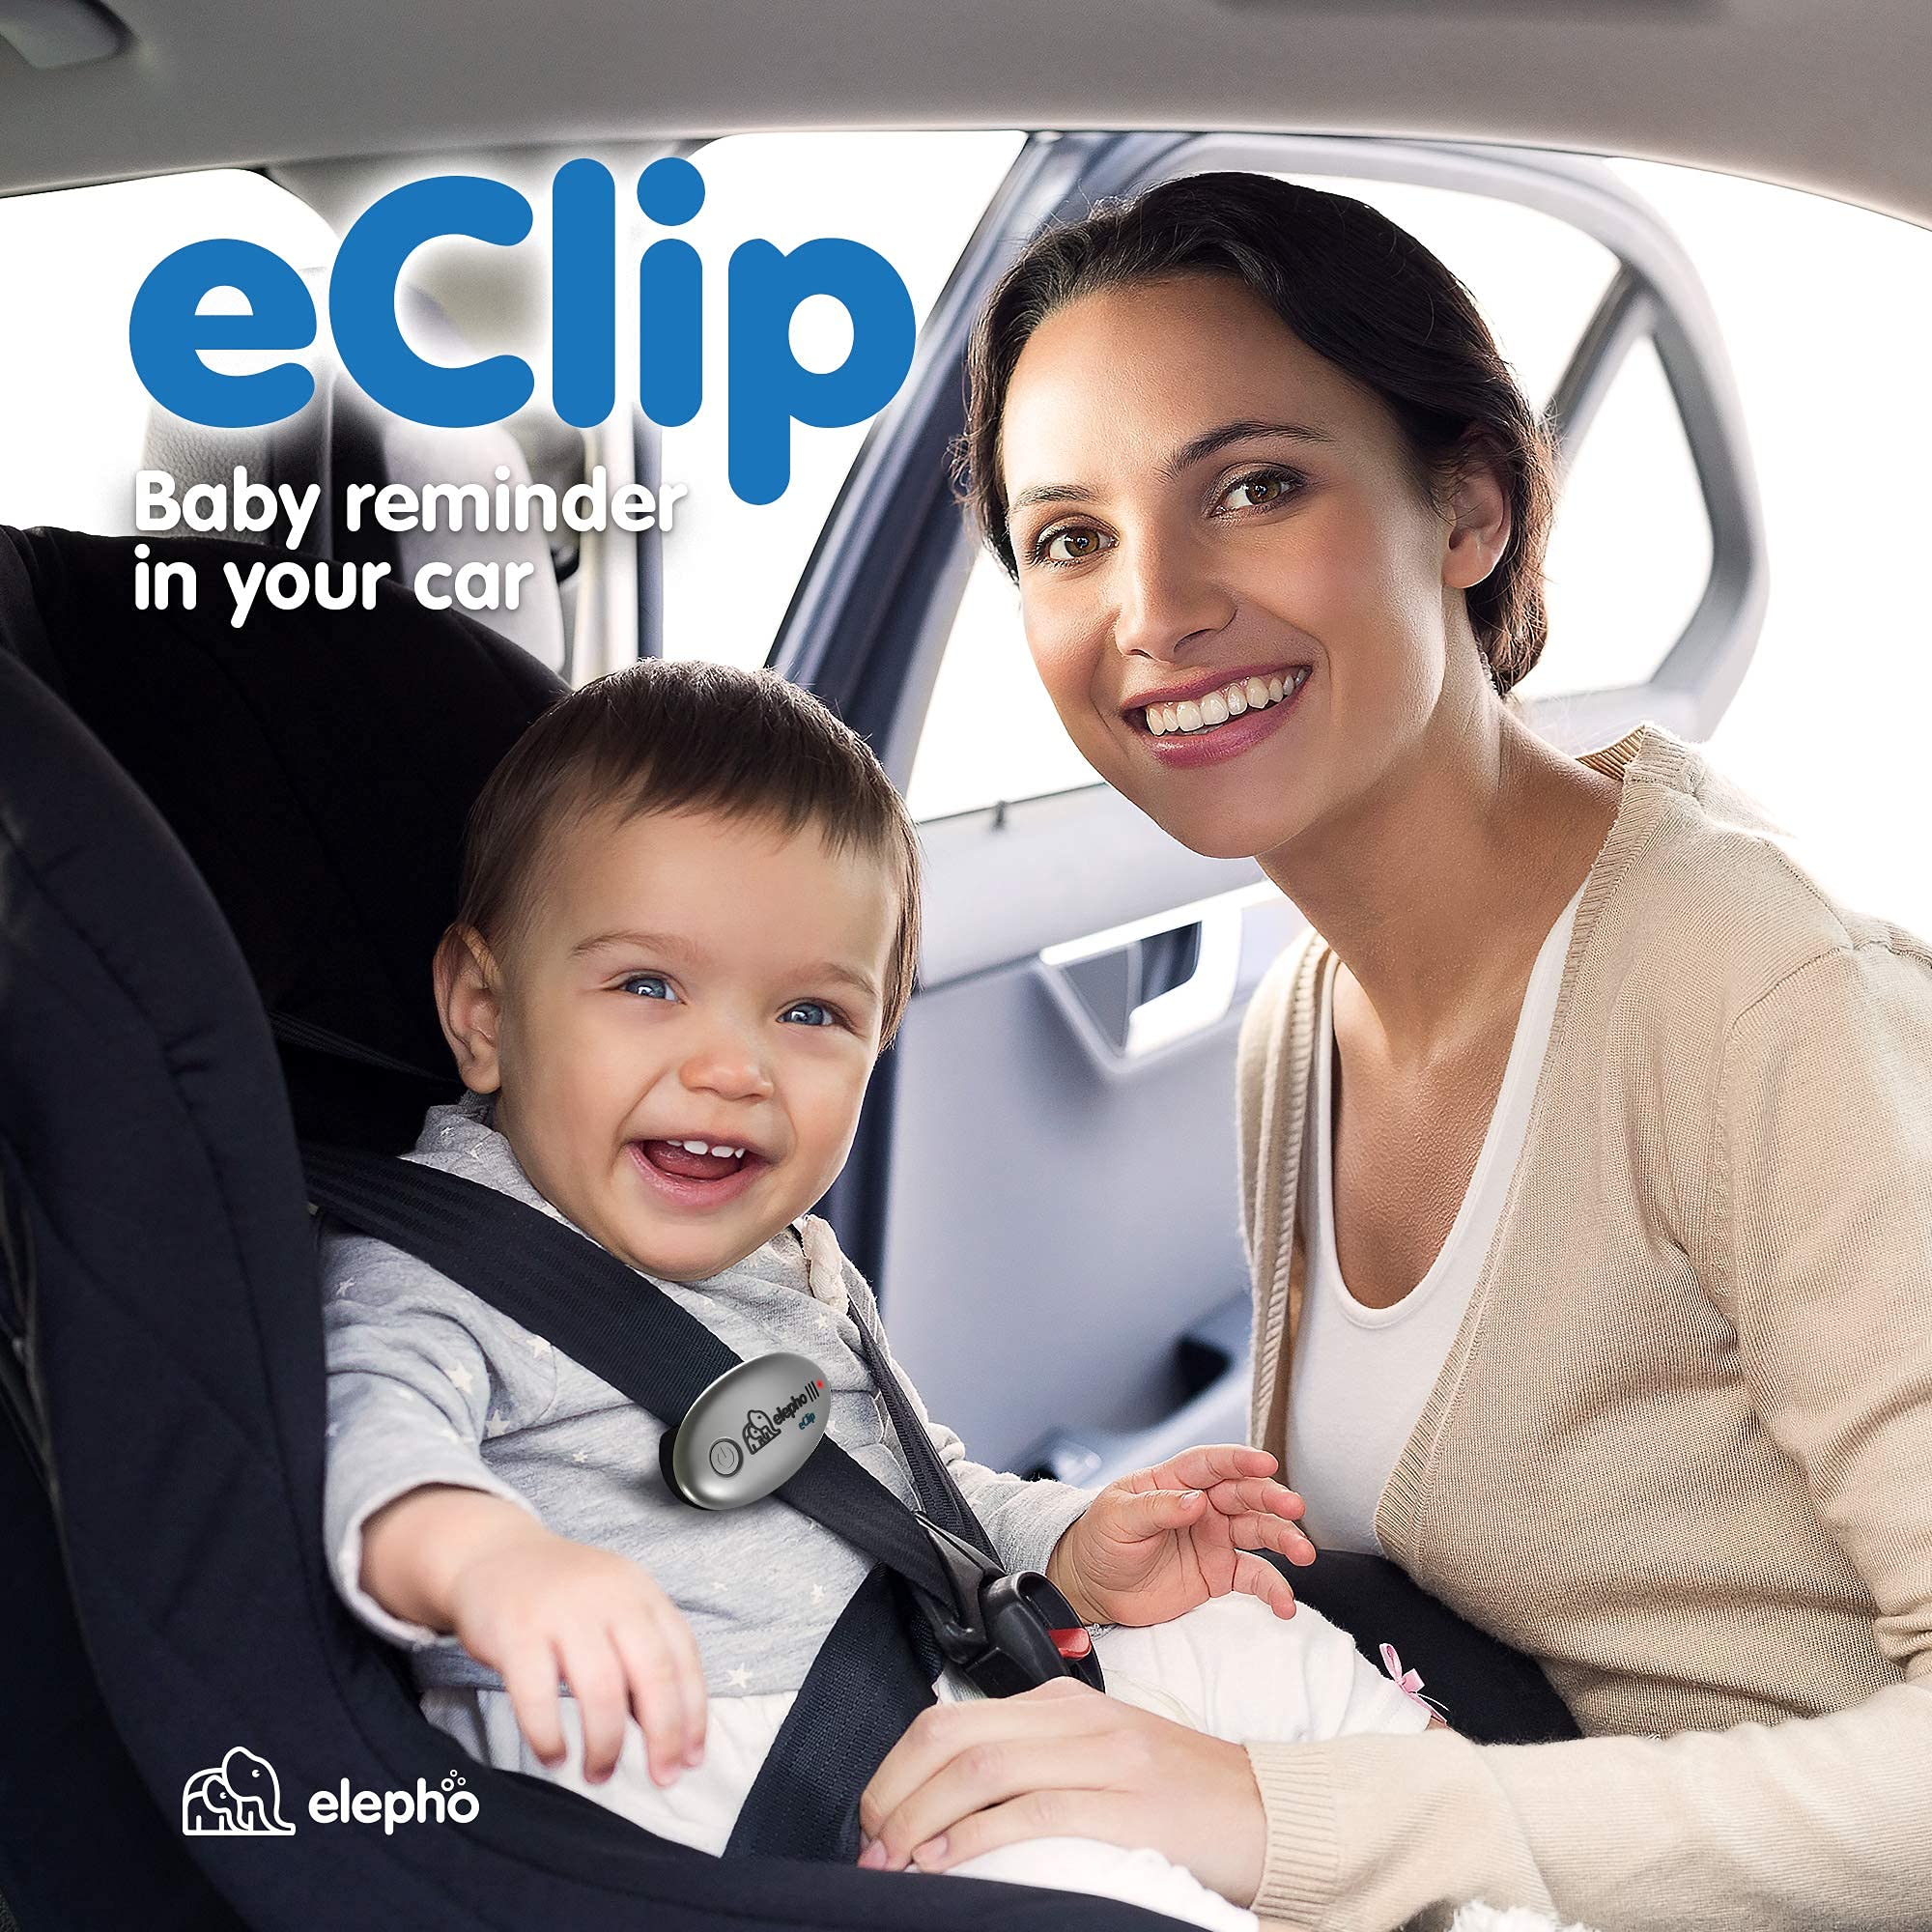 Elepho eClip Baby Safety Reminder for Car | Easily Attaches to Infant Car Seat, Seat Belt or Diaper Bag | Smartphone App Sends Automatic Alerts via Bluetooth for Temperature & Proximity Warnings